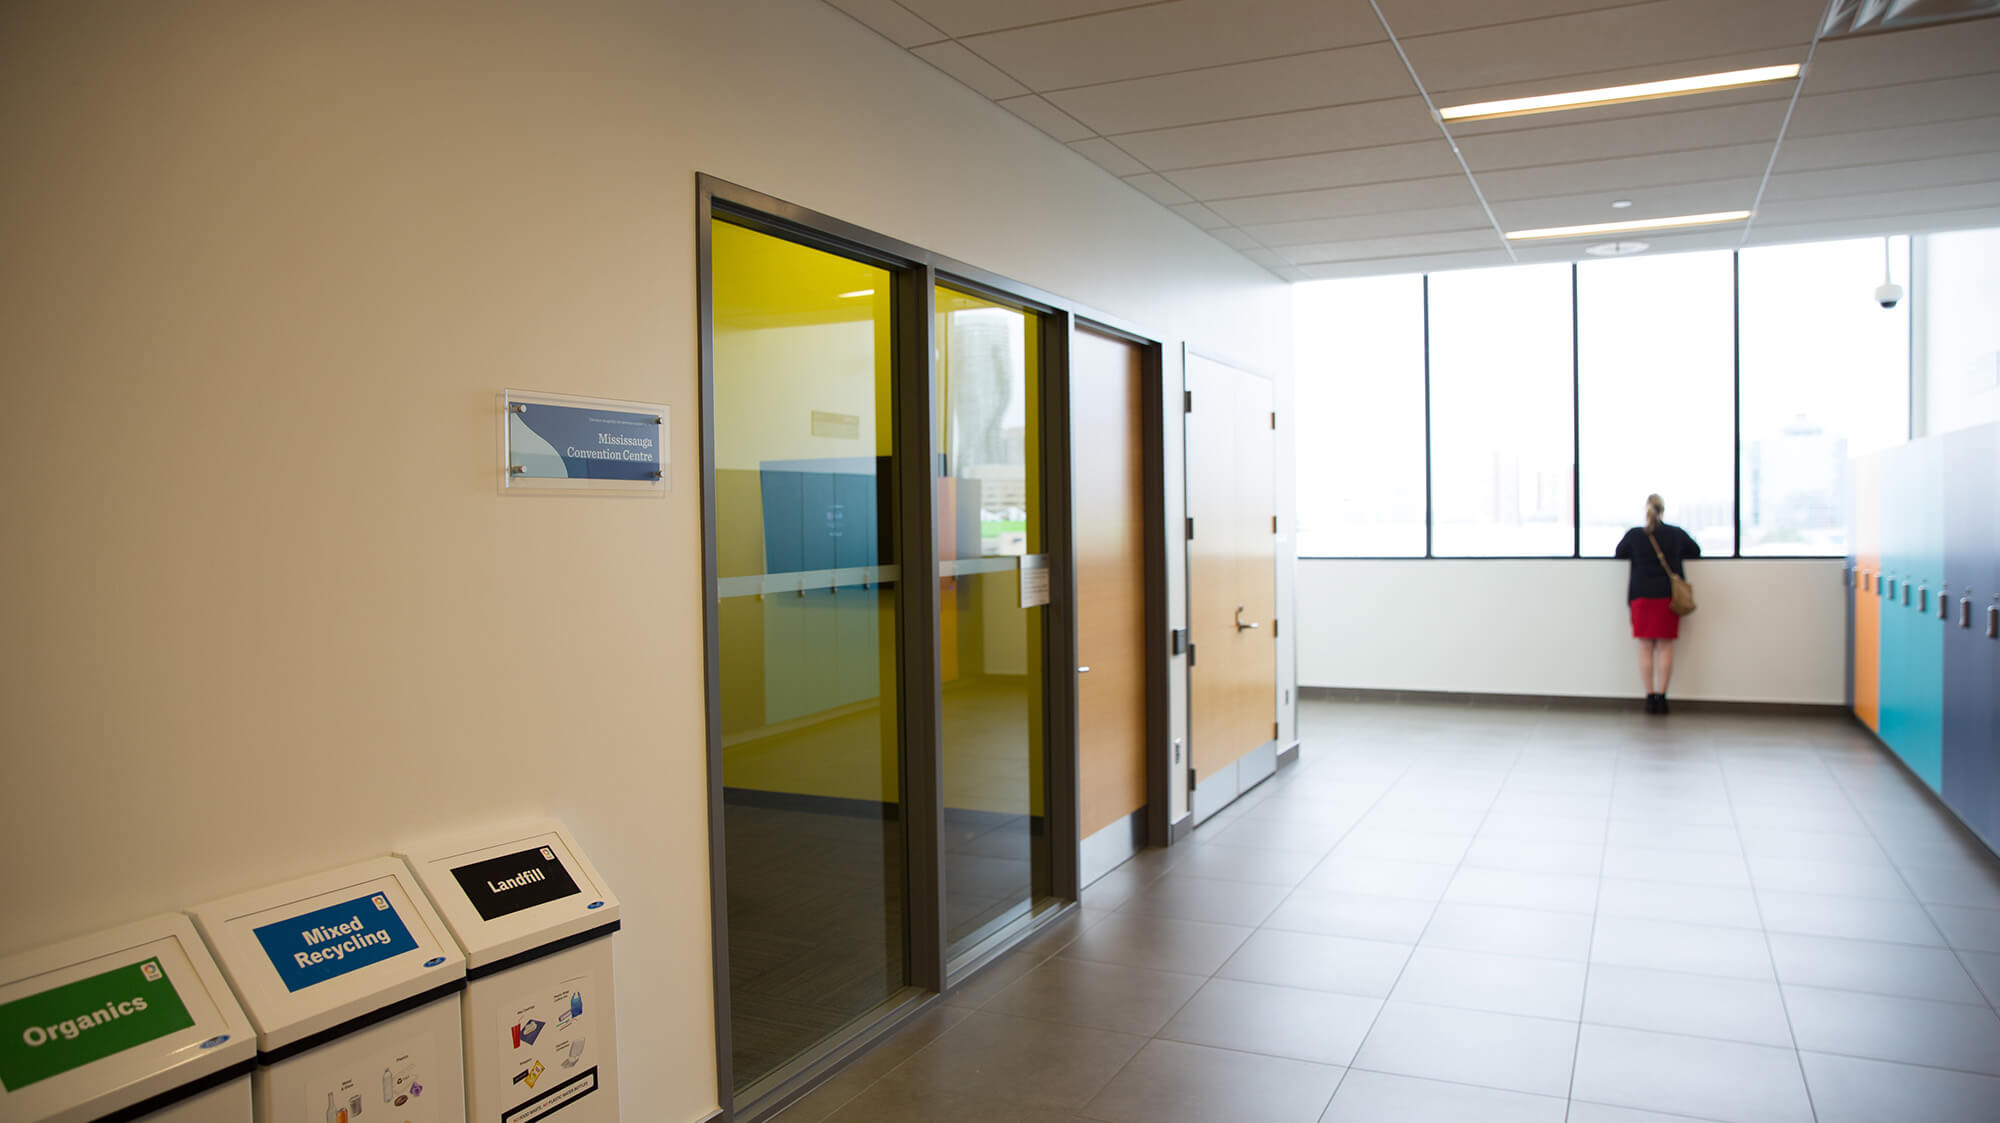 A bright hallway with sliding glass doors ouside a Group Study Room